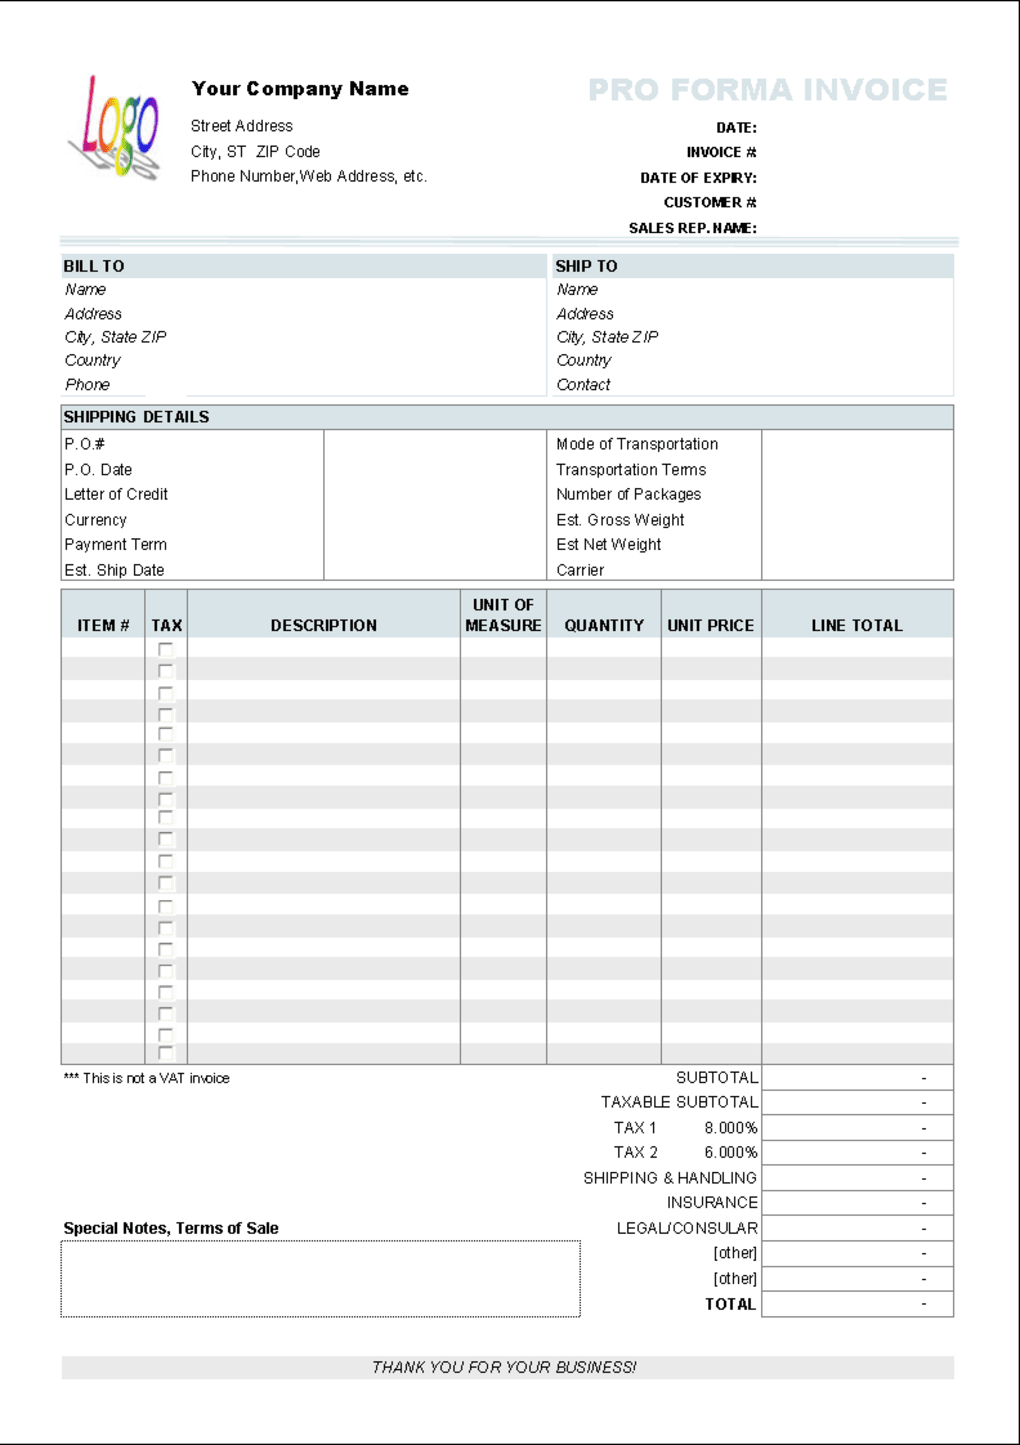 Free Proforma Invoice Template - Download Within Invoice Template Xls Free Download